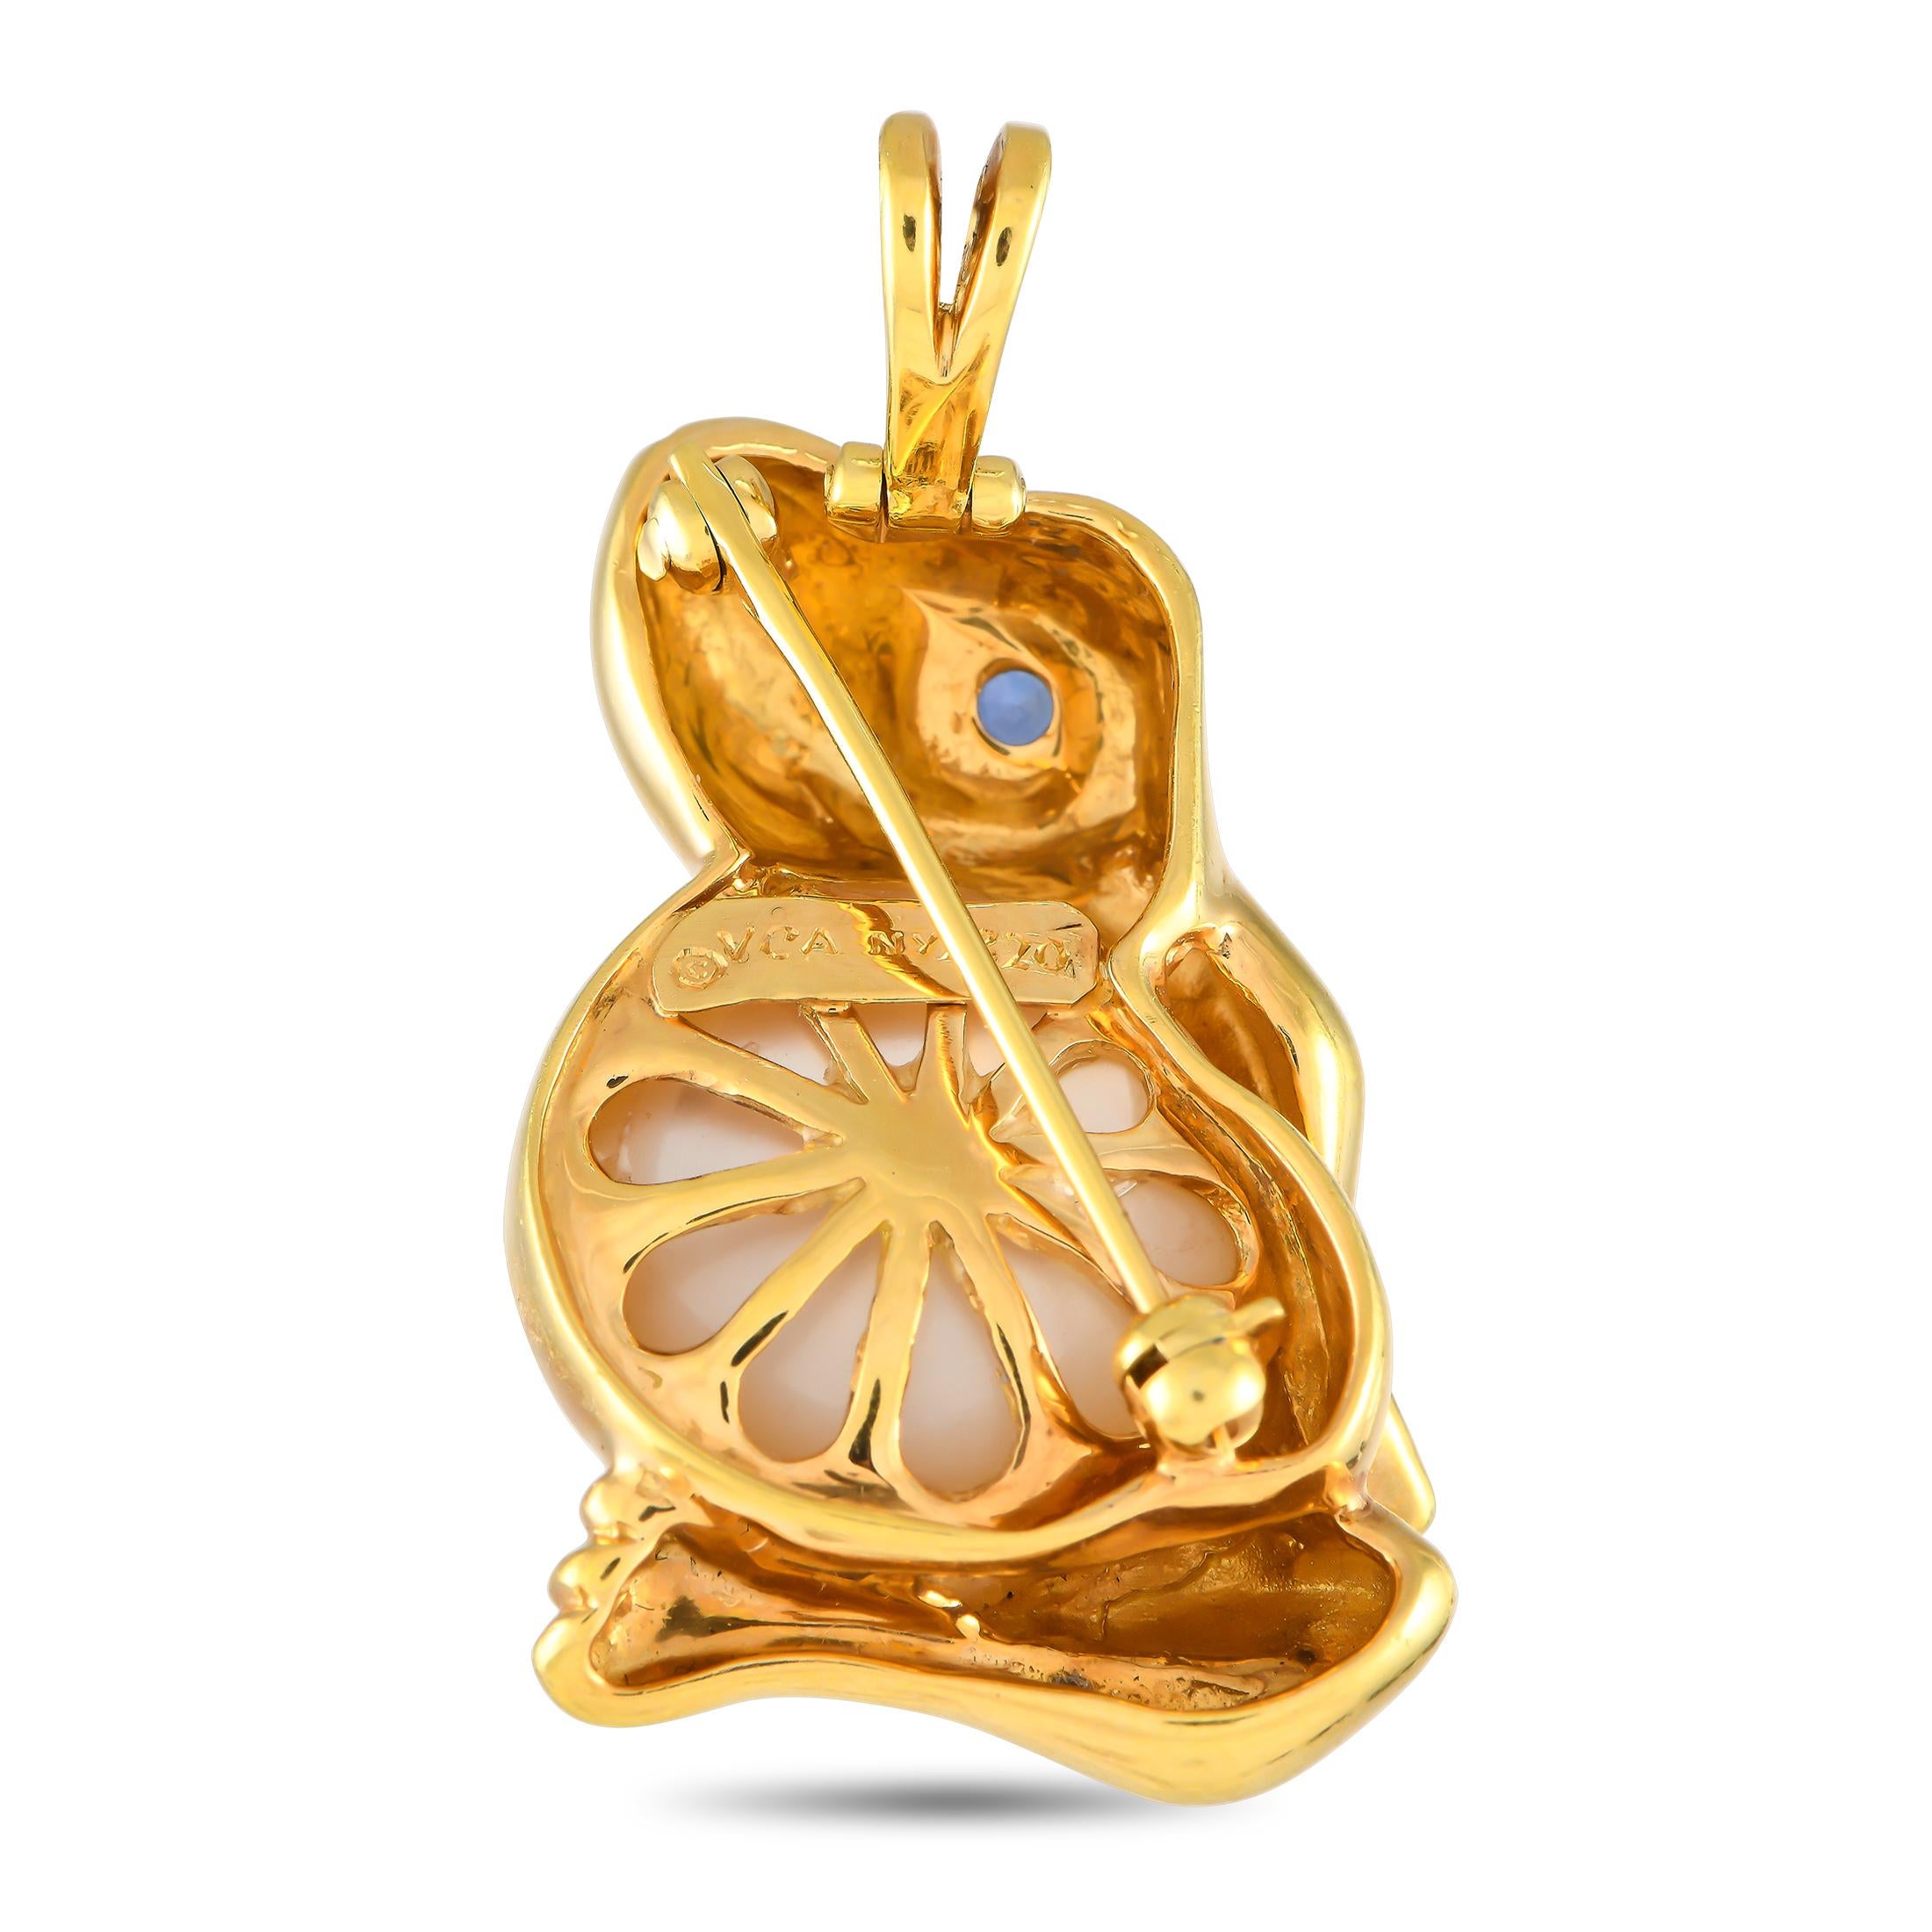 A pin and pendant in one, this Van Cleef & Arpels creation would make a fine choice to reinvent your style with playful accessorizing. This 18K yellow gold piece of jewelry features a frog silhouette with a sapphire eye and a gorgeous Mother of